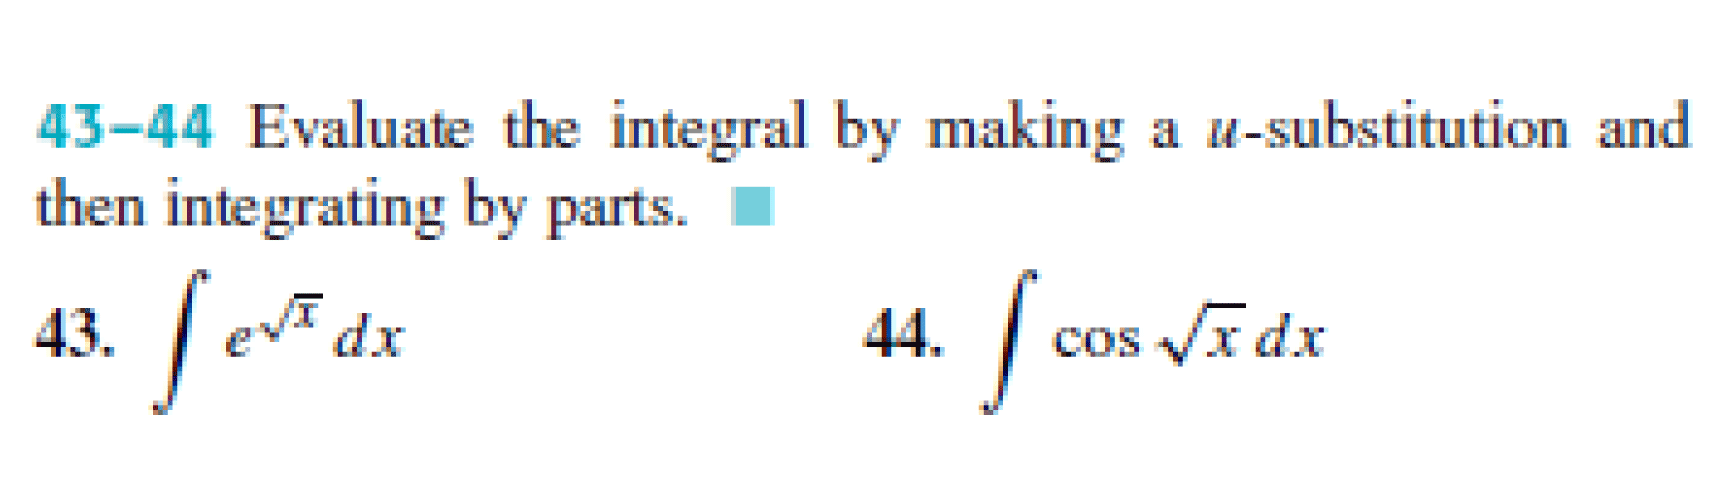 43-44 Evaluate the integral
then integrating by parts.
43.
dx
